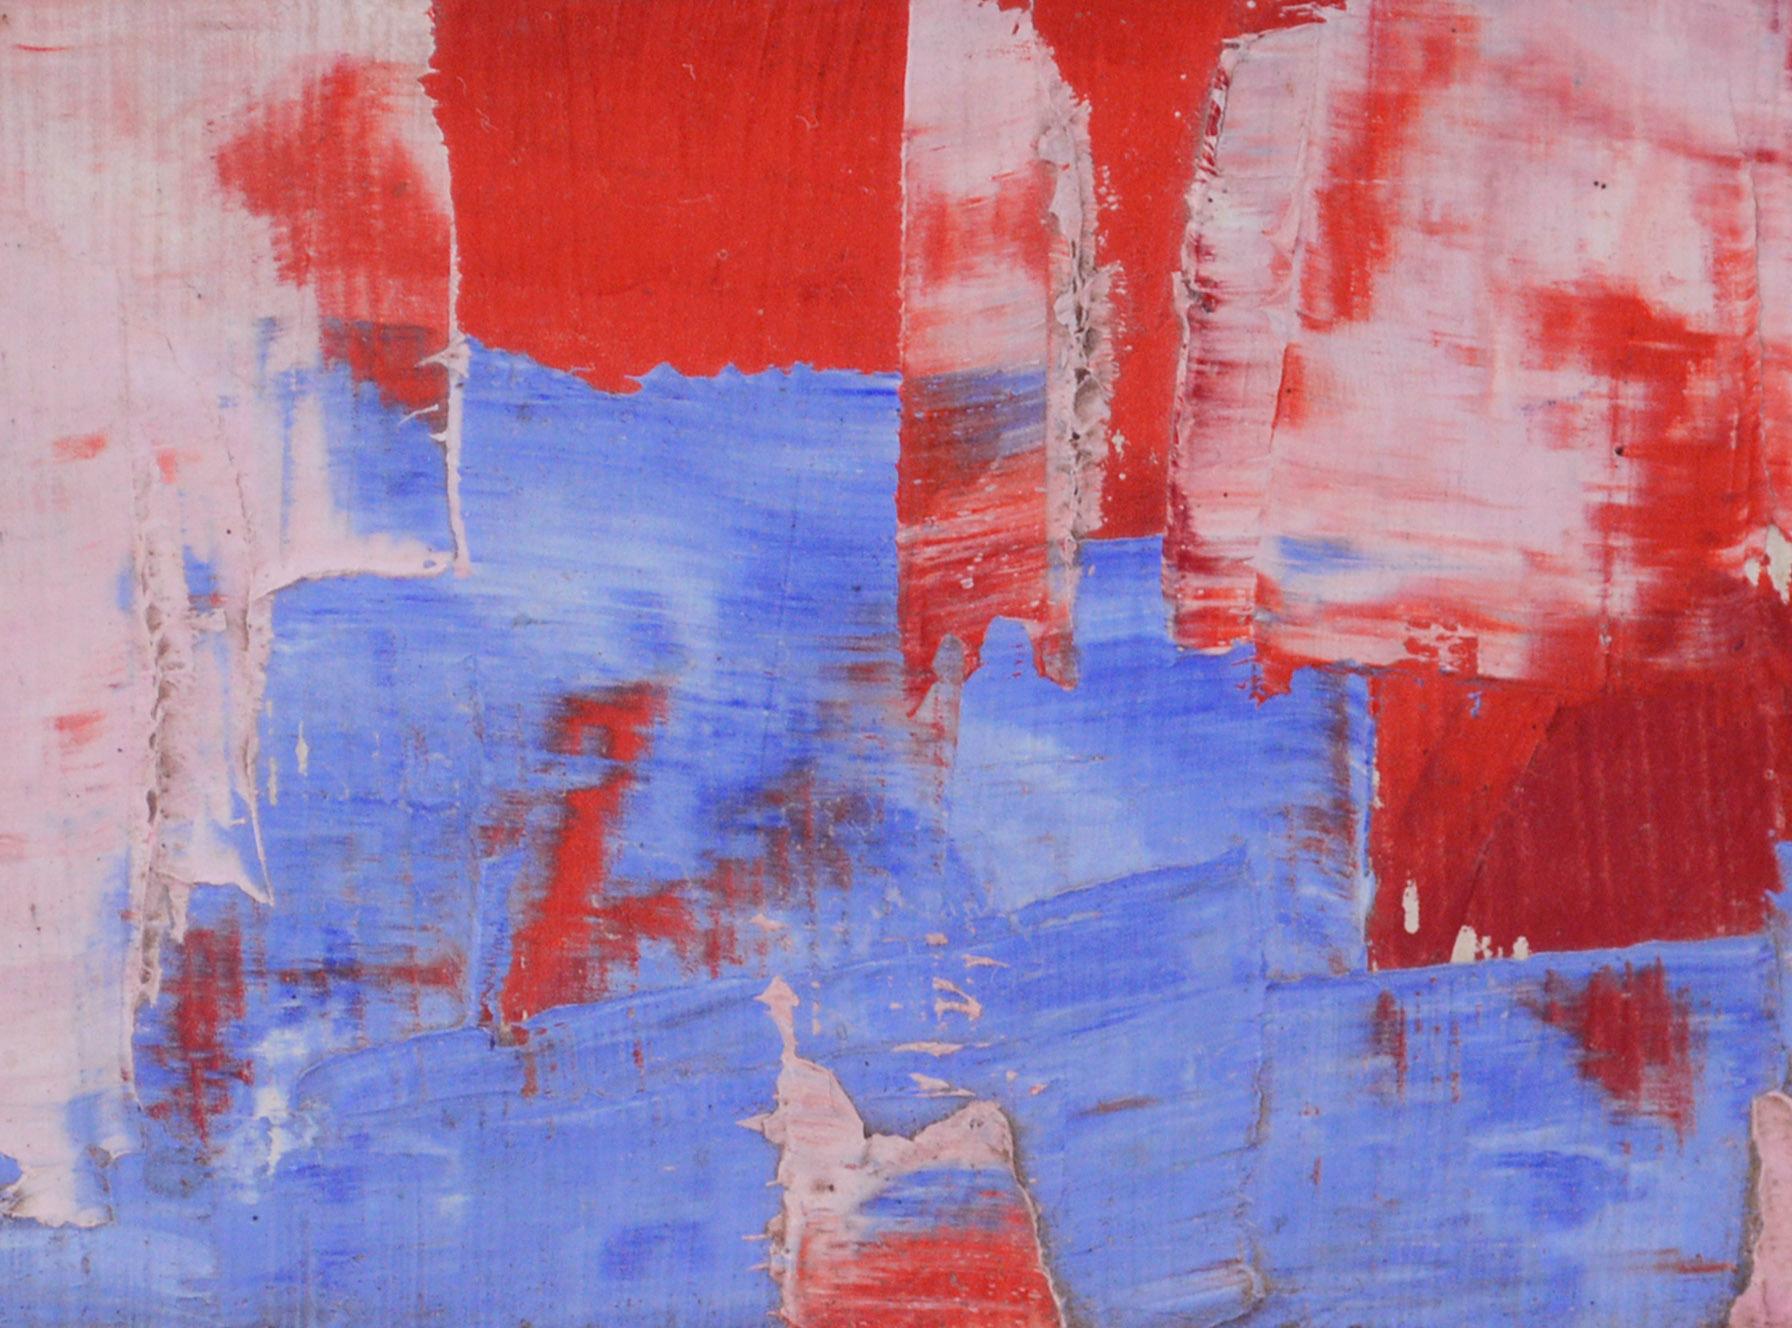 Out of the Blue, Miniature Red & Blue Abstract  - Abstract Expressionist Painting by Tom Hamil